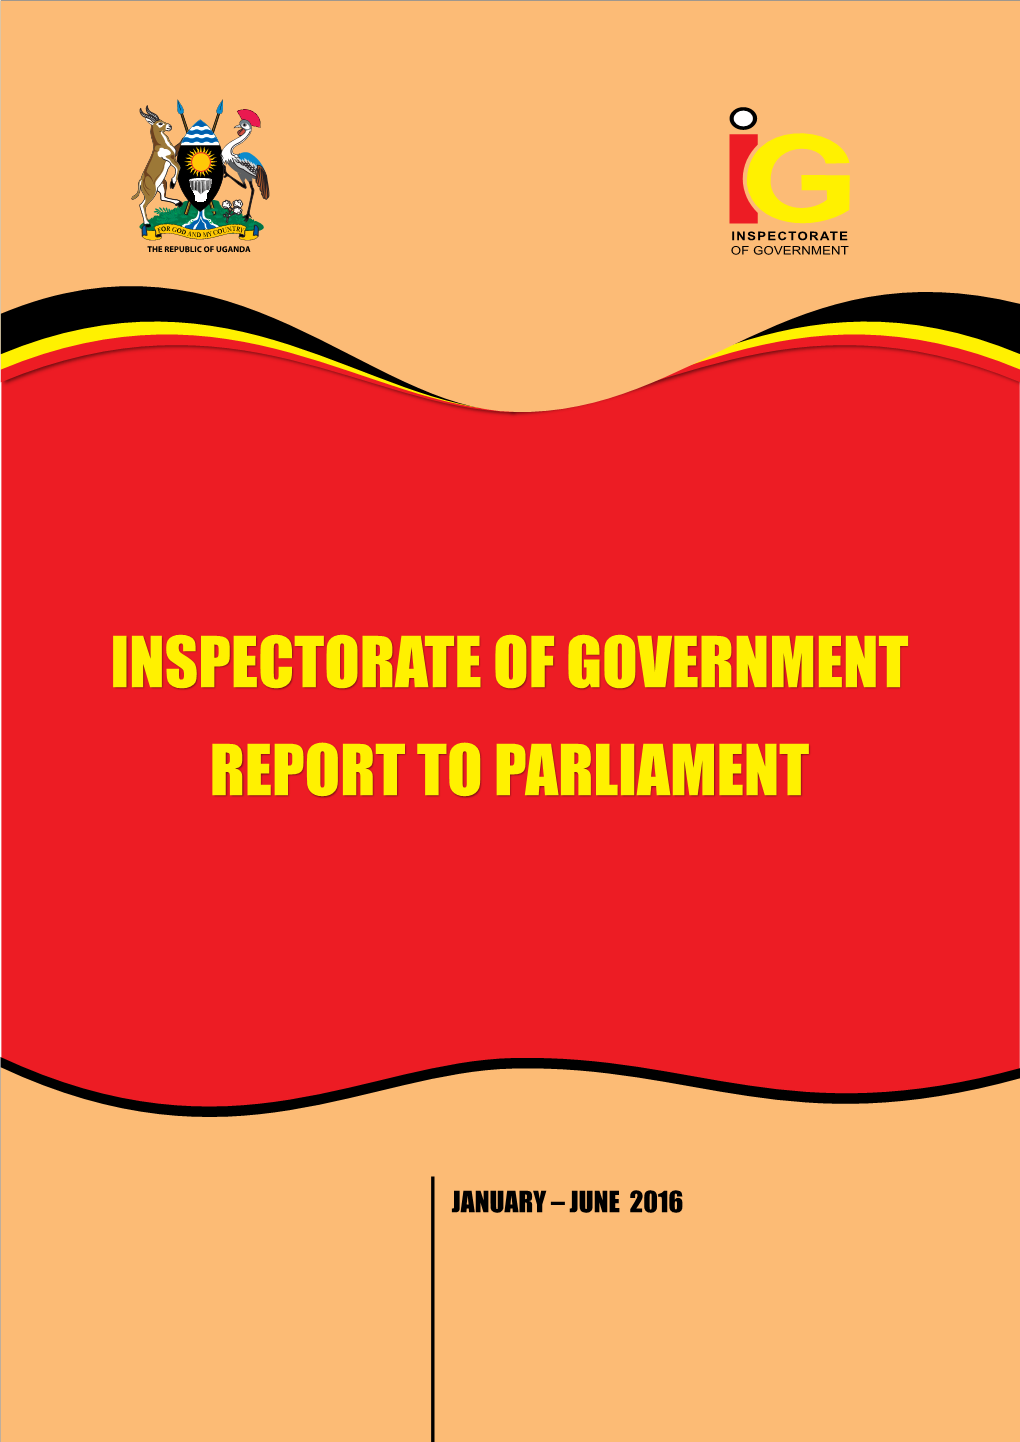 IG Report to Parliament January